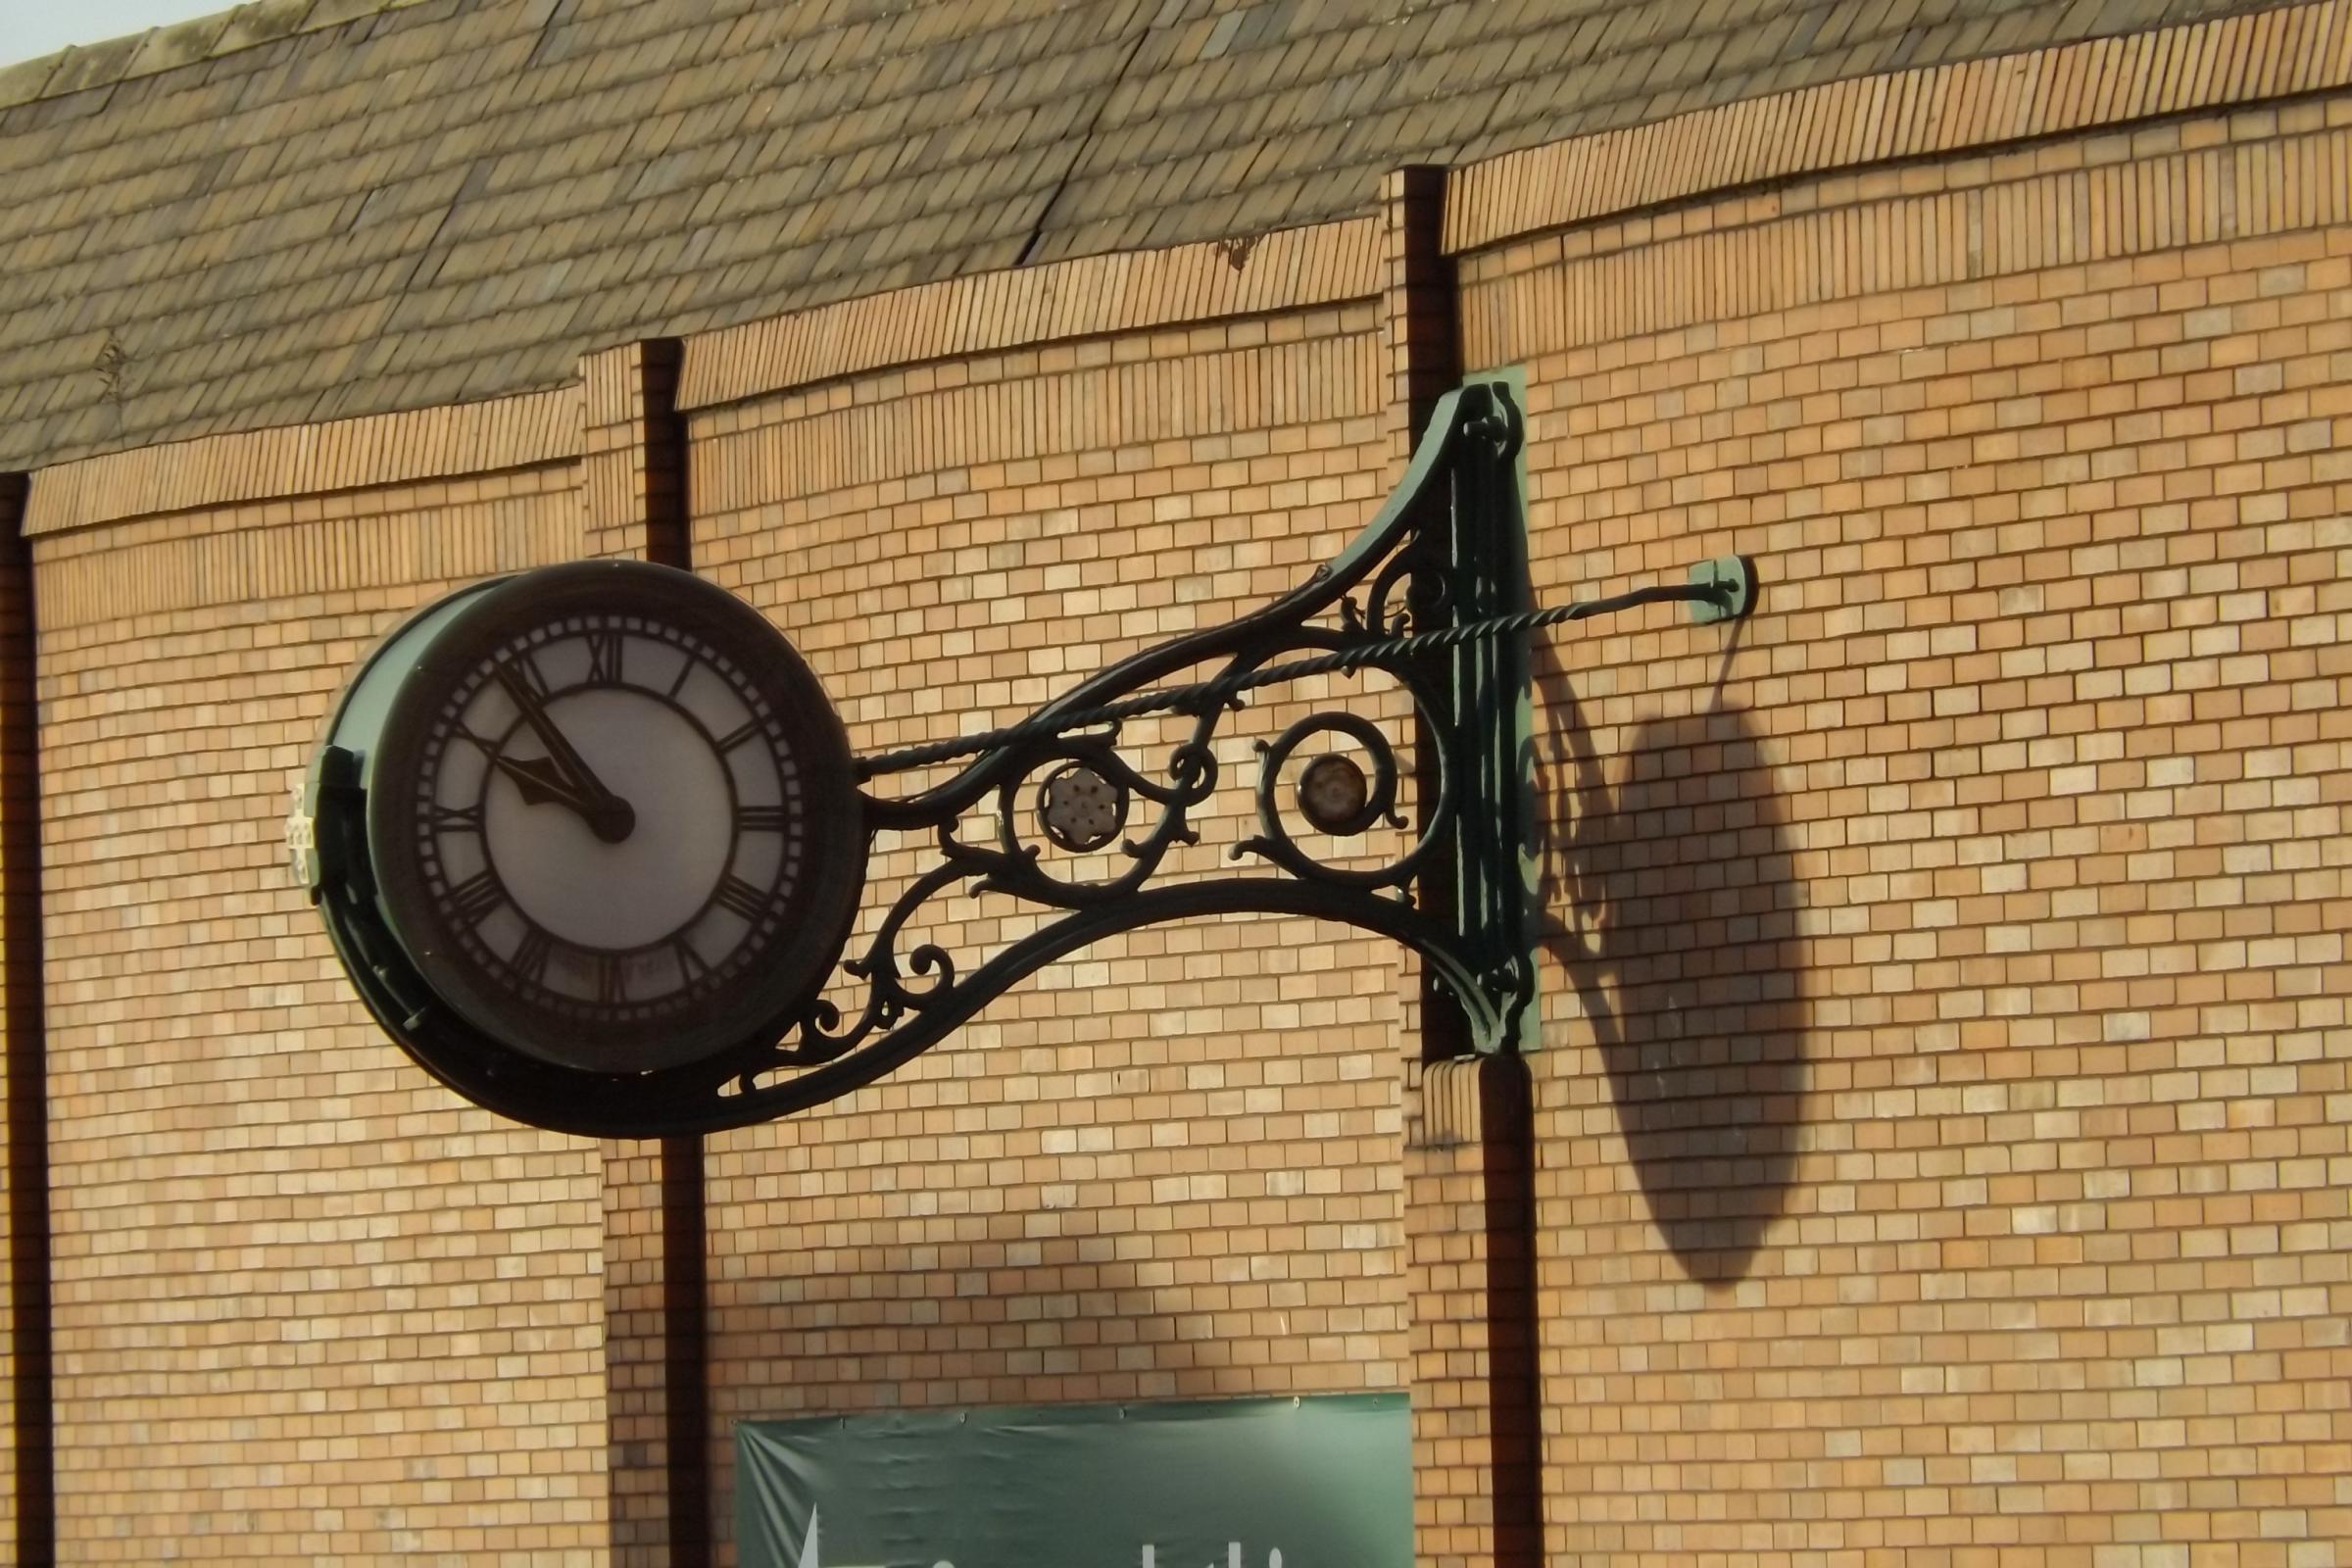 The clock had seen better days and needed restoring before being erected back into place